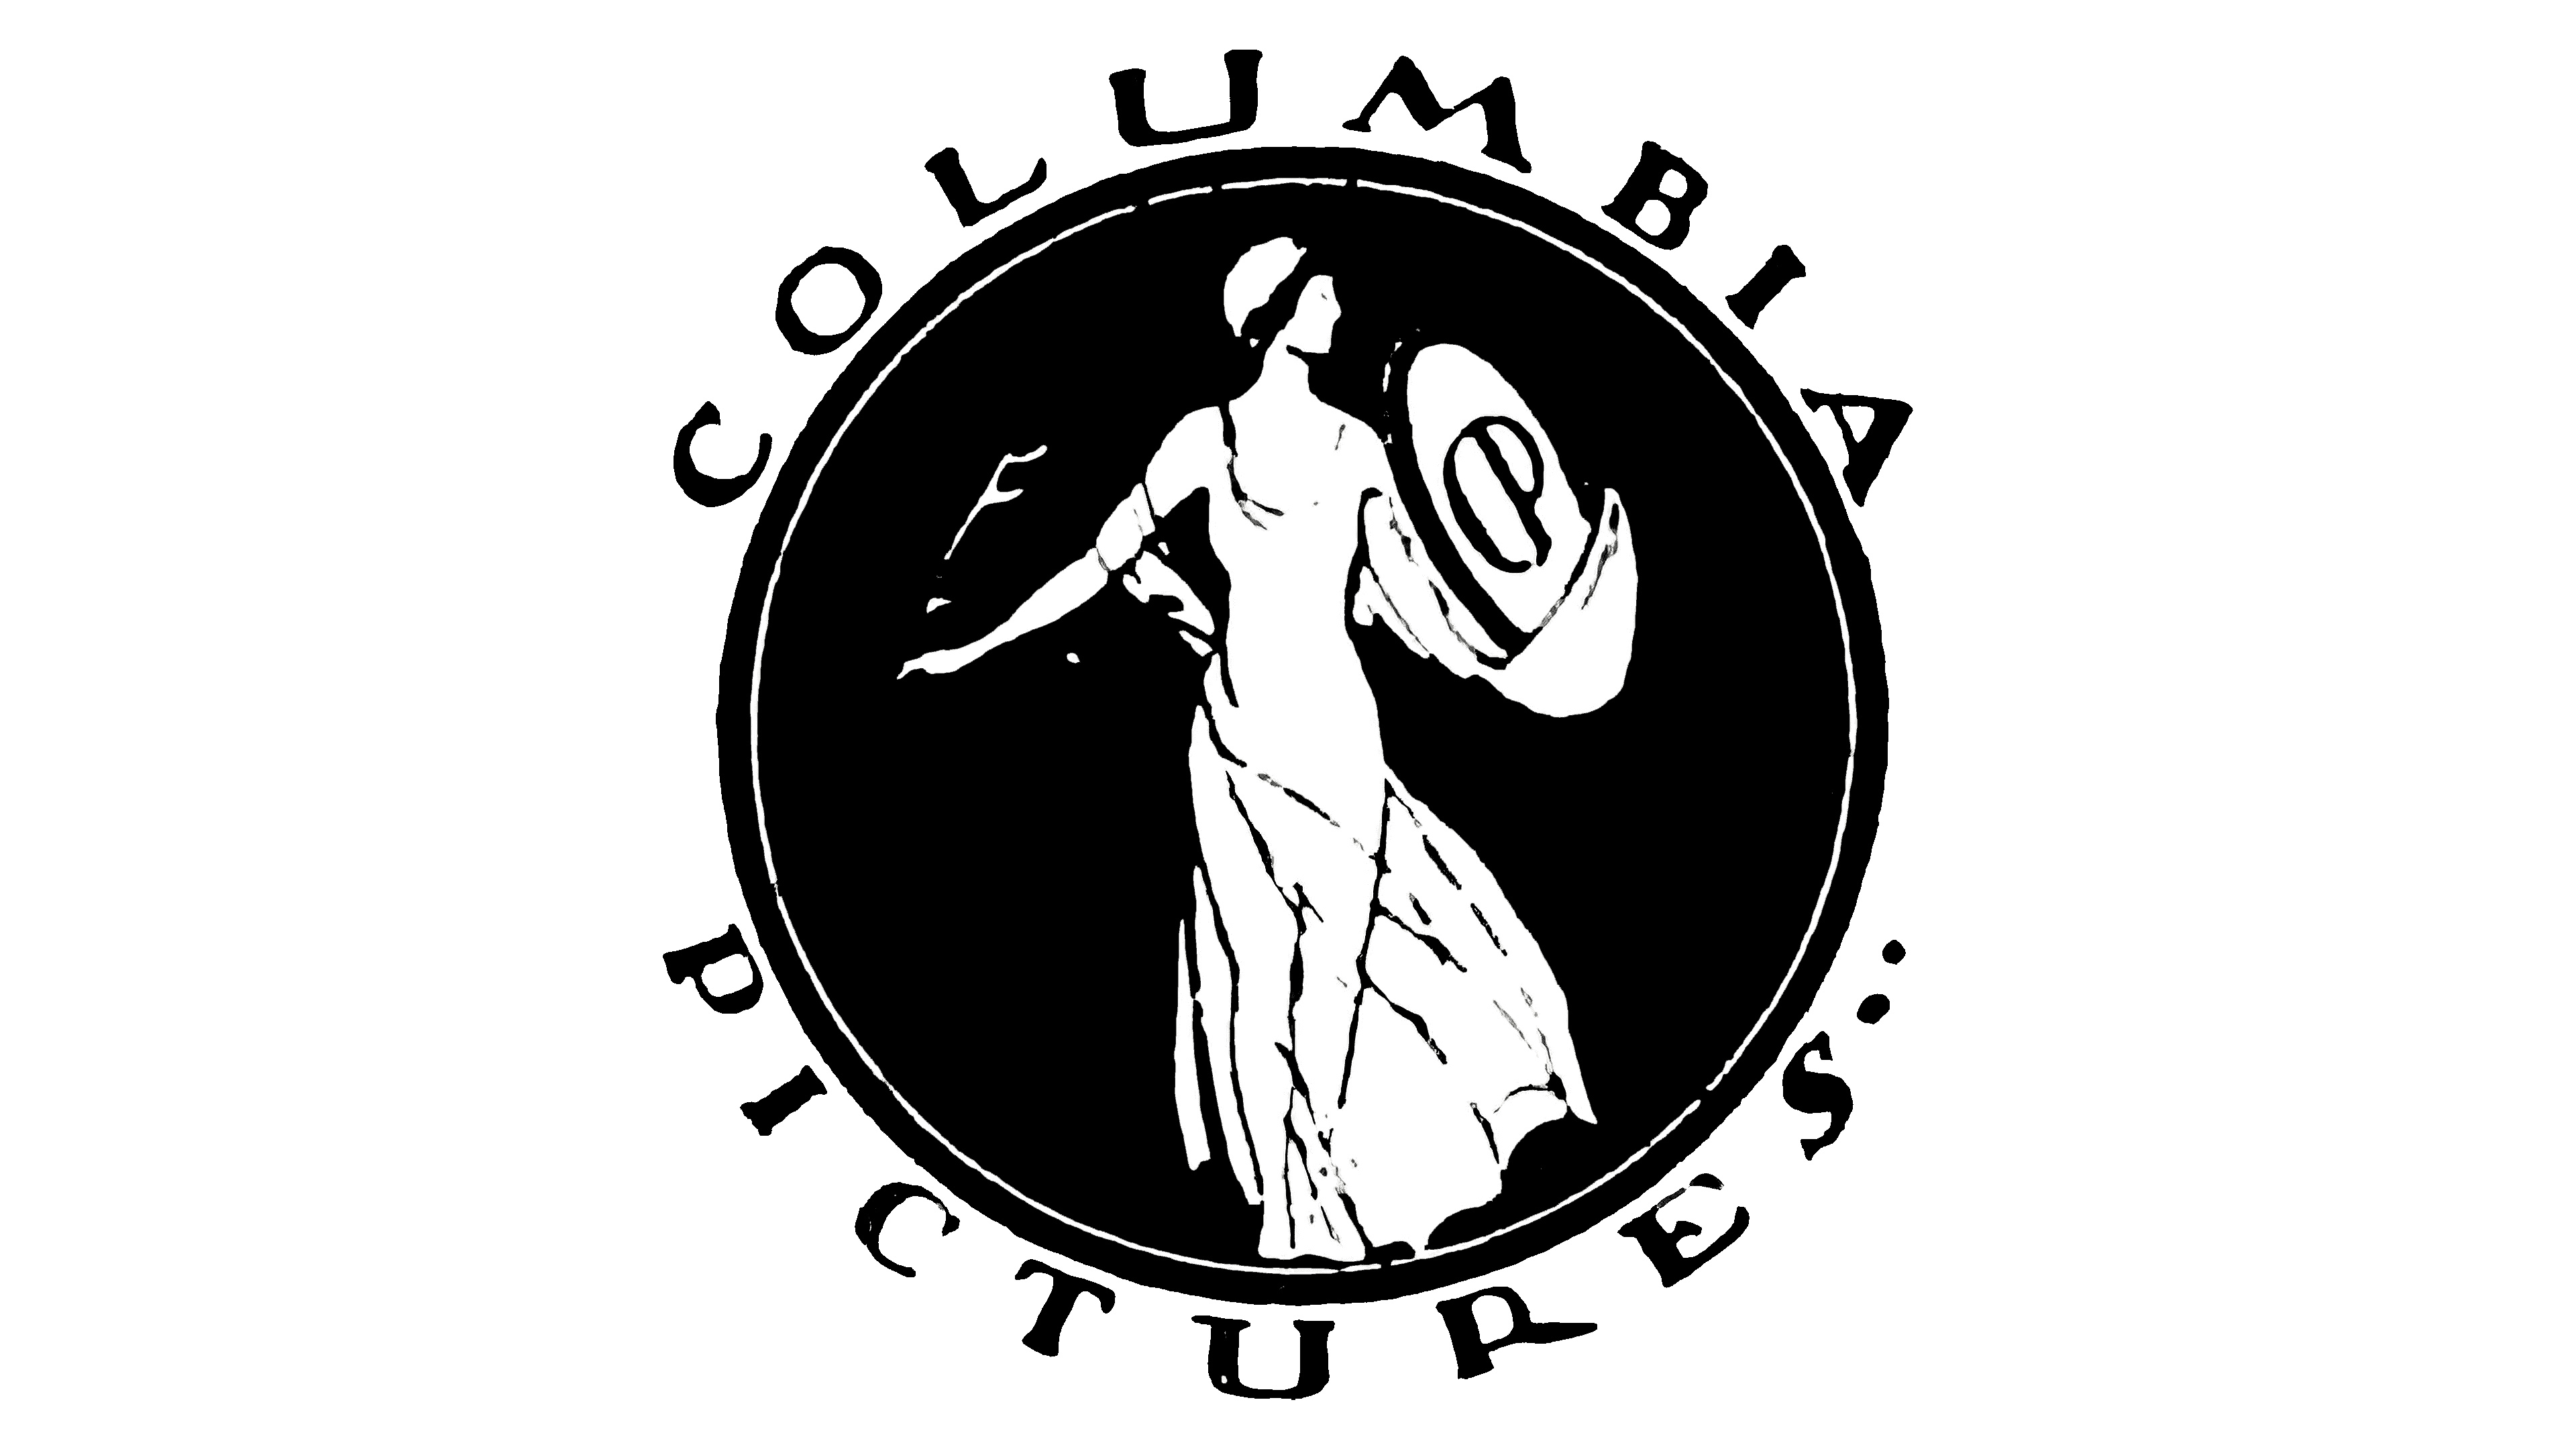 Columbia Pictures movies, Columbia pictures logo, Symbol meaning, History, 3840x2160 4K Desktop